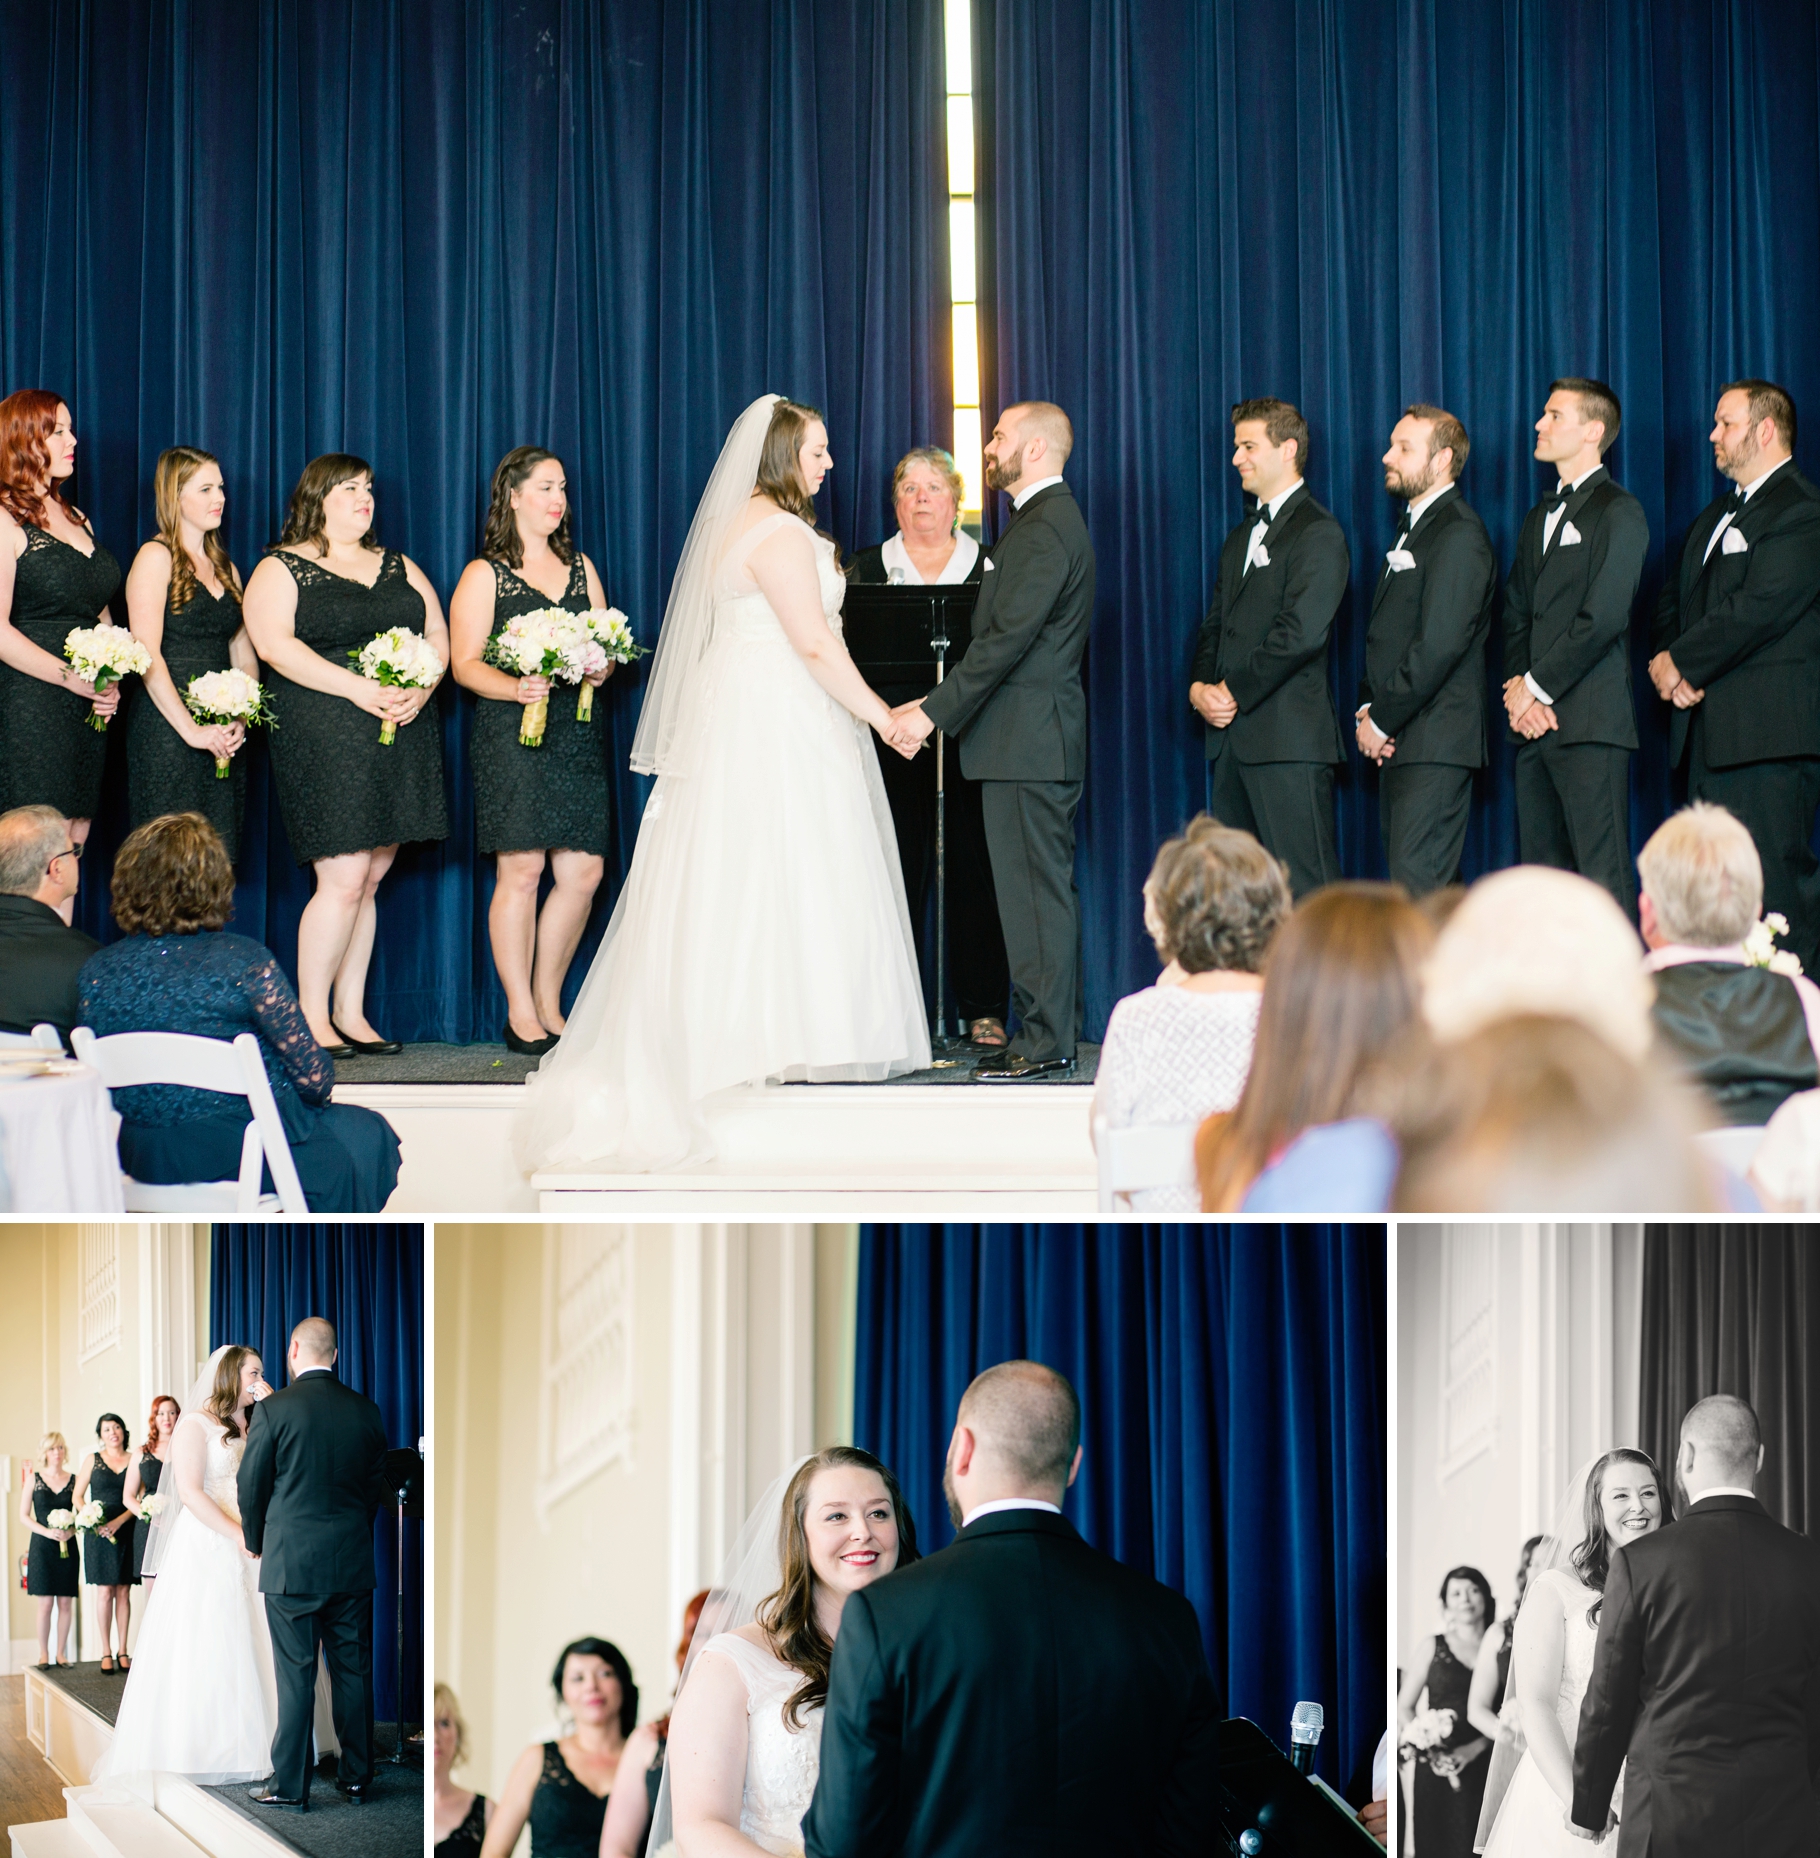 42-Bride-Groom-Ceremony-Photos-Great-Hall-Green-Lake-Seattle-Wedding-Photographer-Photography-by-Betty-Elaine